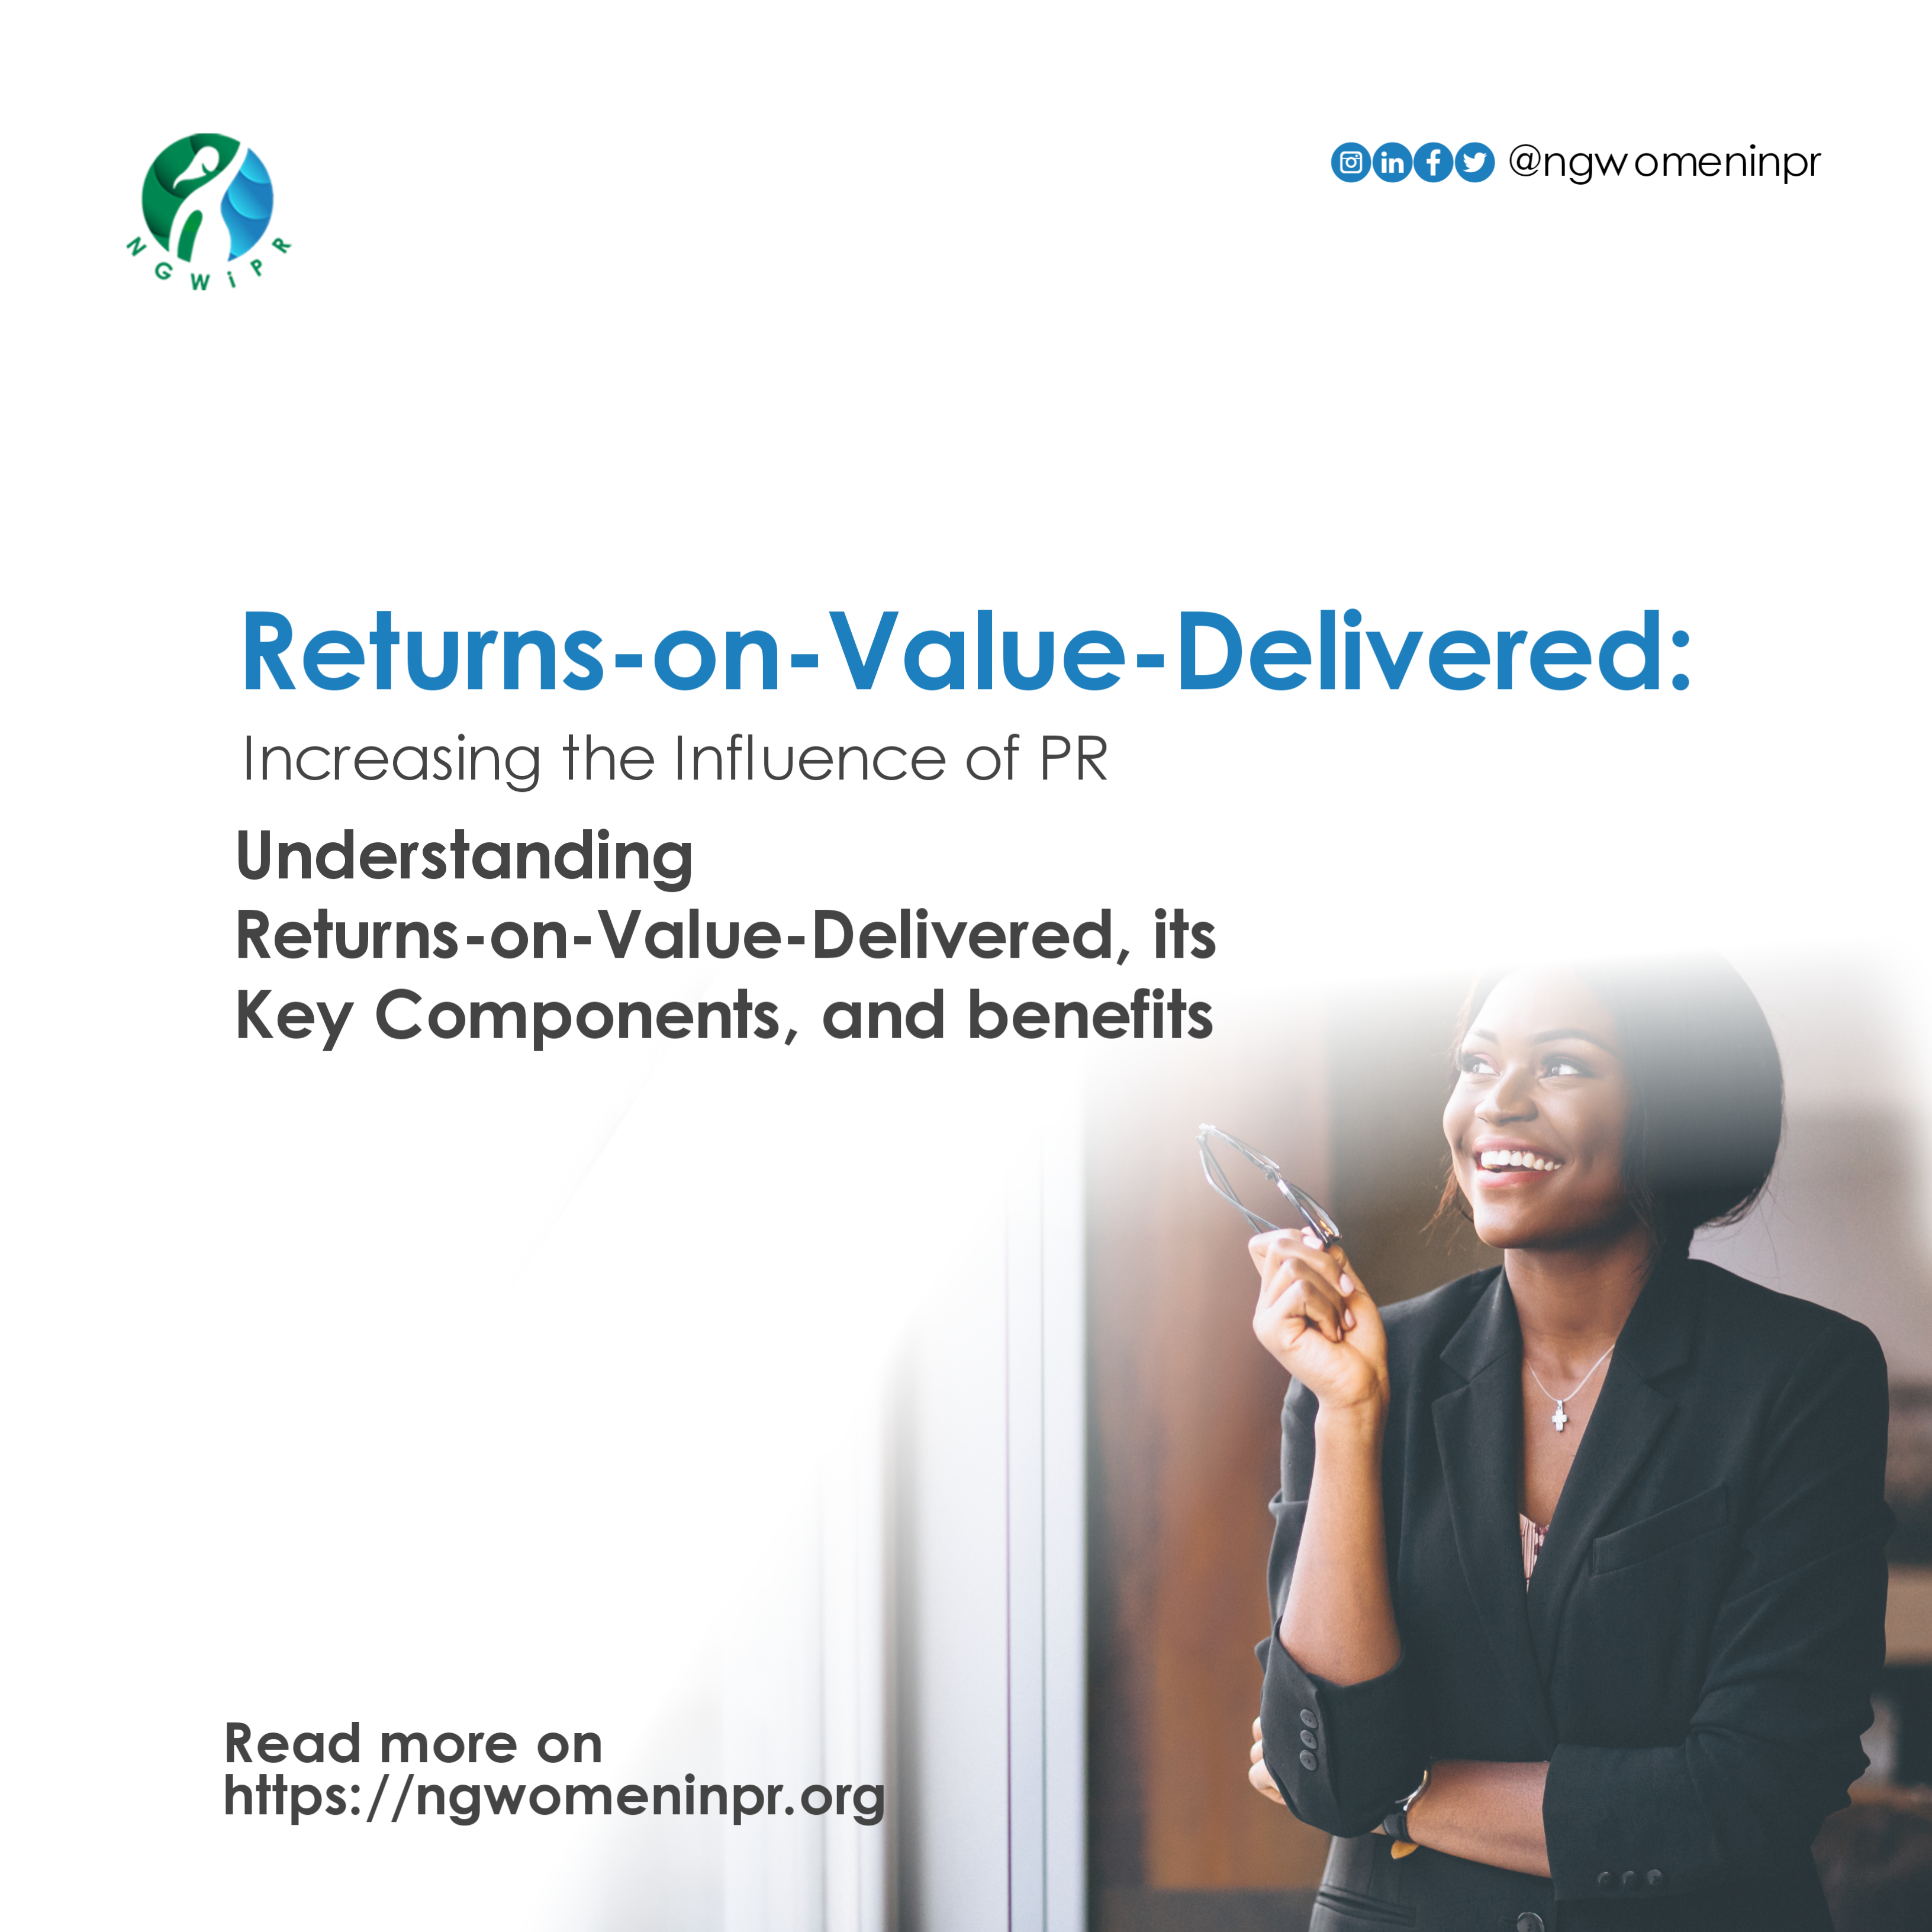 Returns-on-Value-Delivered: Increasing the Influence of Public Relation